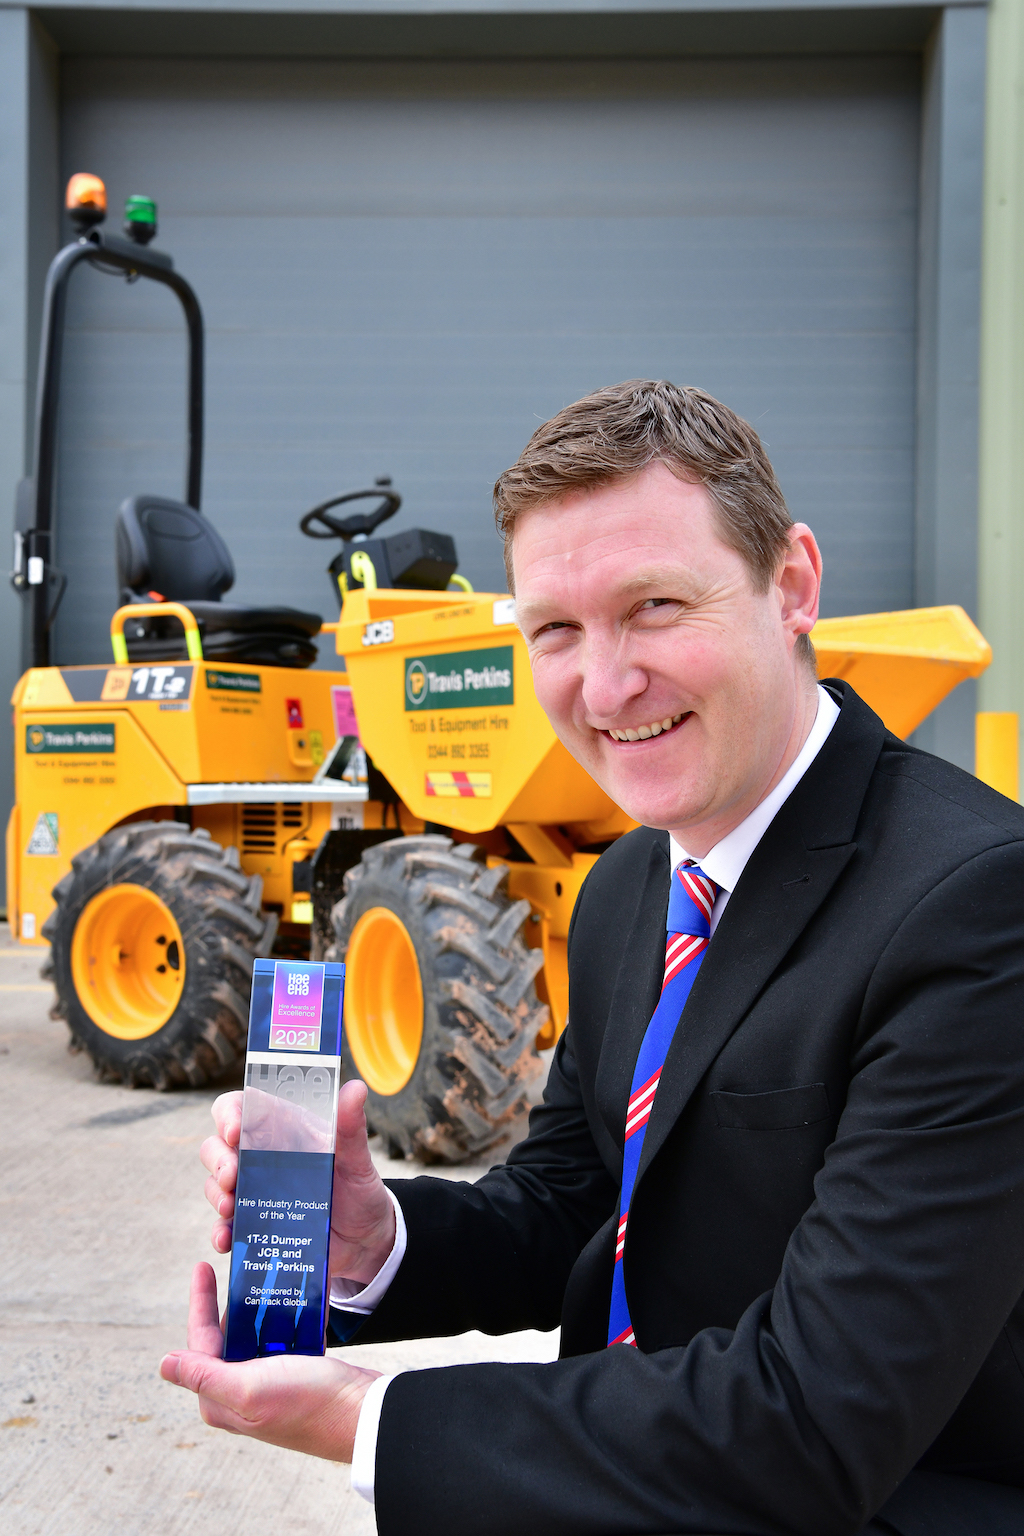 Safety first as JCB site dumper crowned Hire Product of the Year